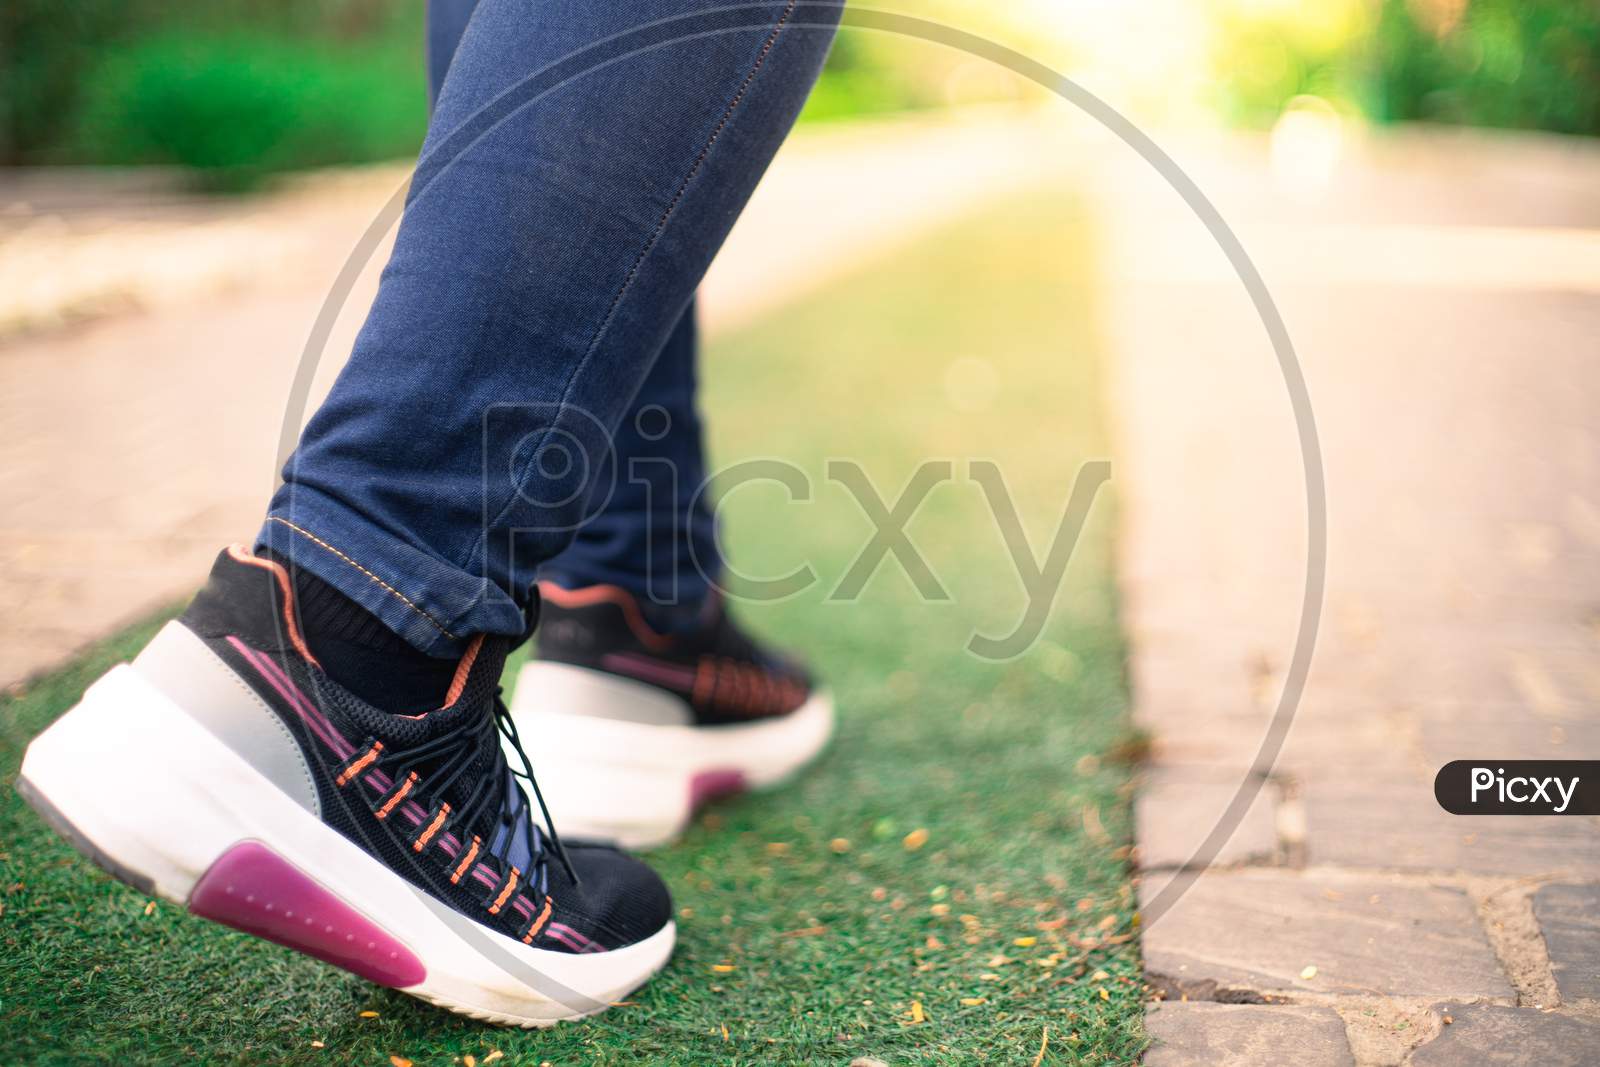 Low Macro Shot Showing Colorful Shoes Of Strong Independent Powerful Girl Going Into Sunlight While Jogging Walking For Fitness And Health. Shows Progress, Achievement, Growth And Evolution